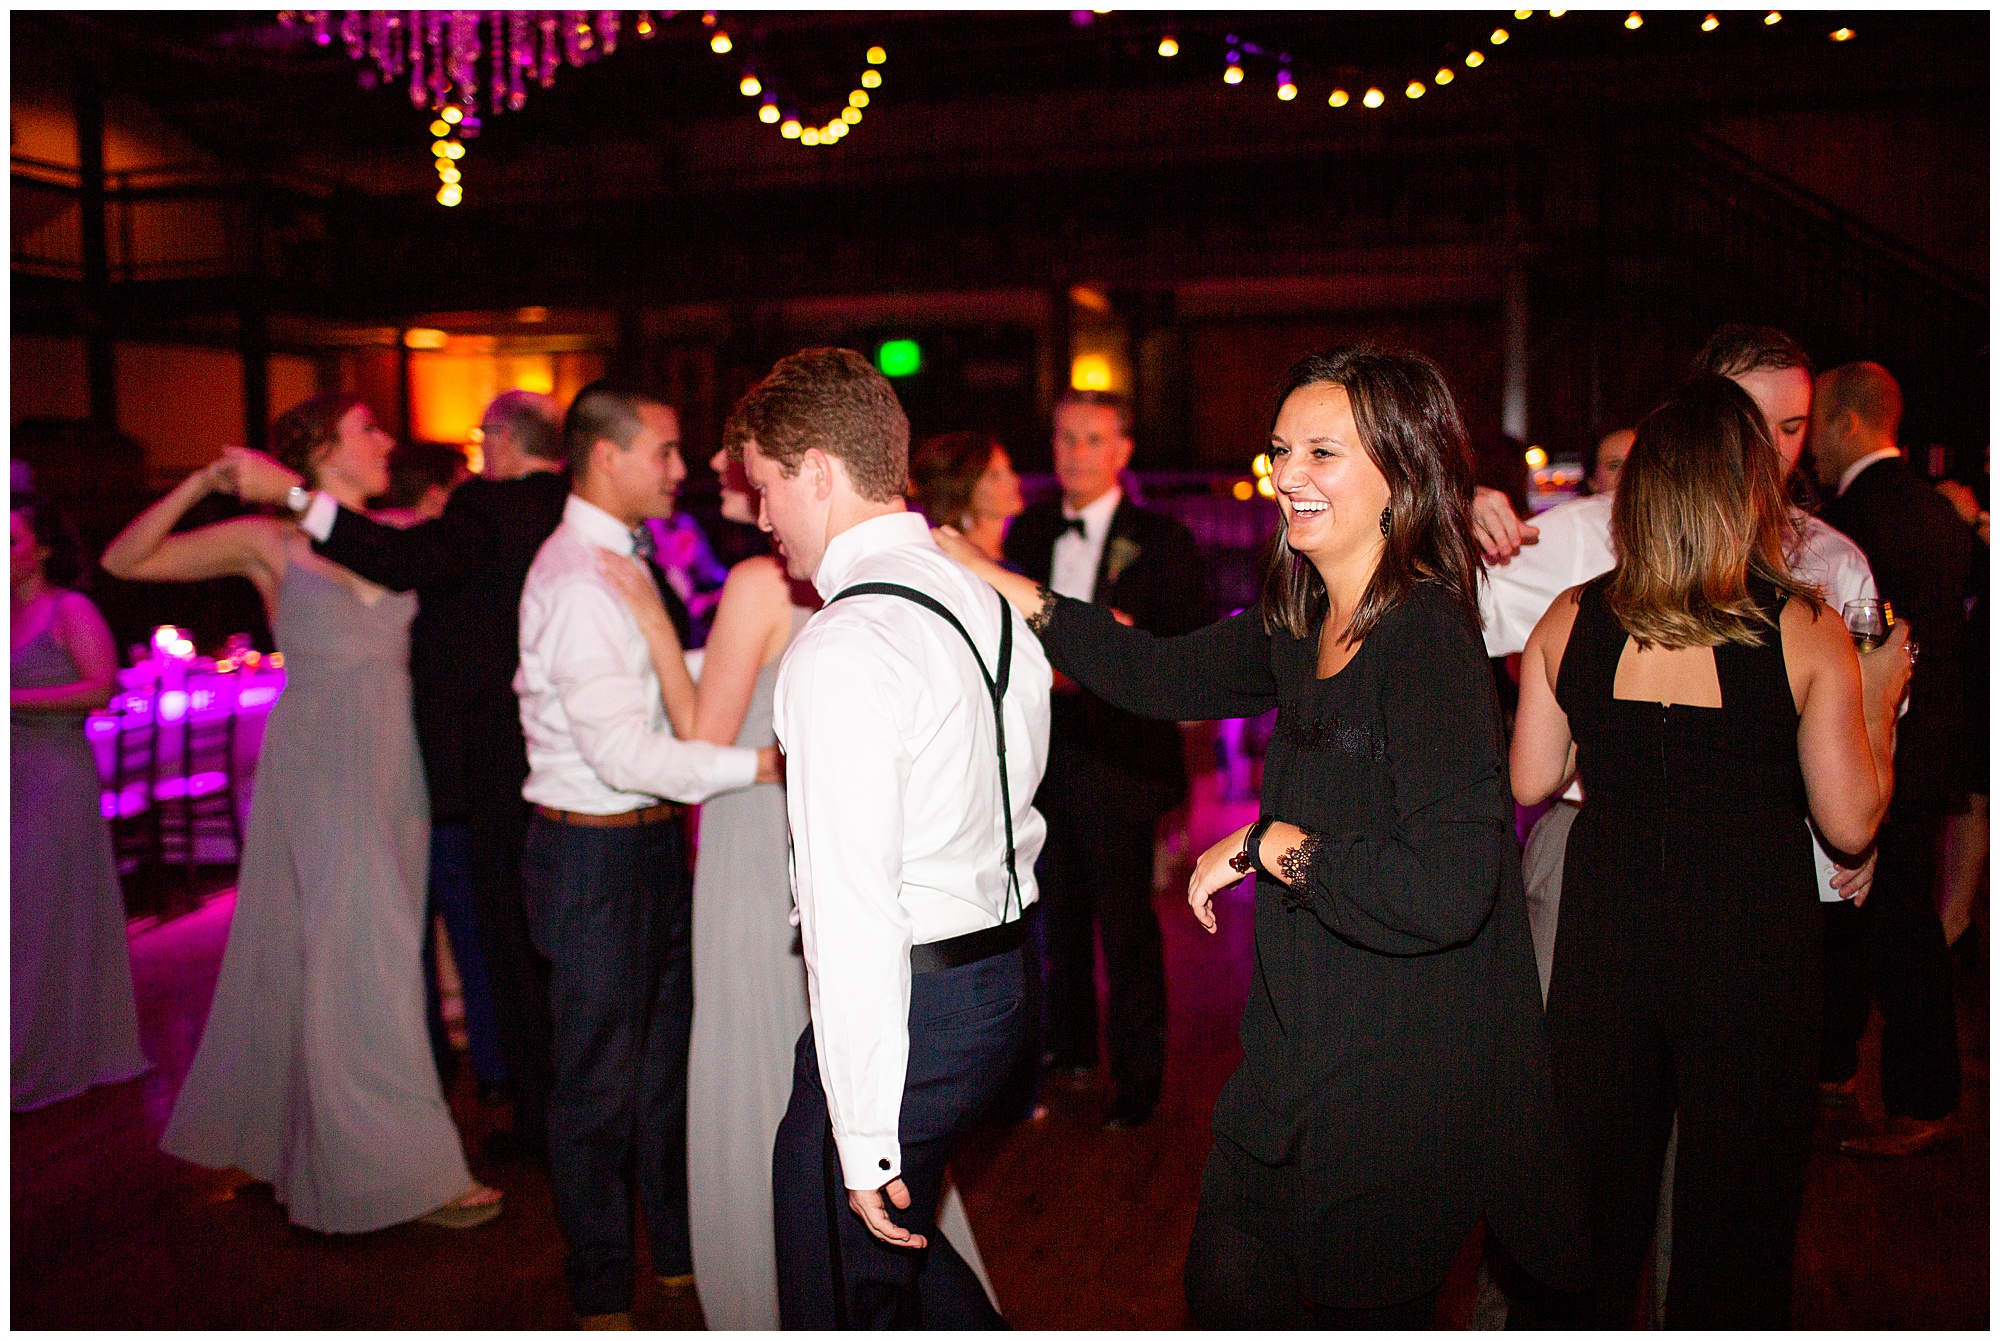 Have you seen a groom's pants split during a reception? Find out more behind the scenes of 2019 weddings and sessions with Eleanor Stenner Photography!